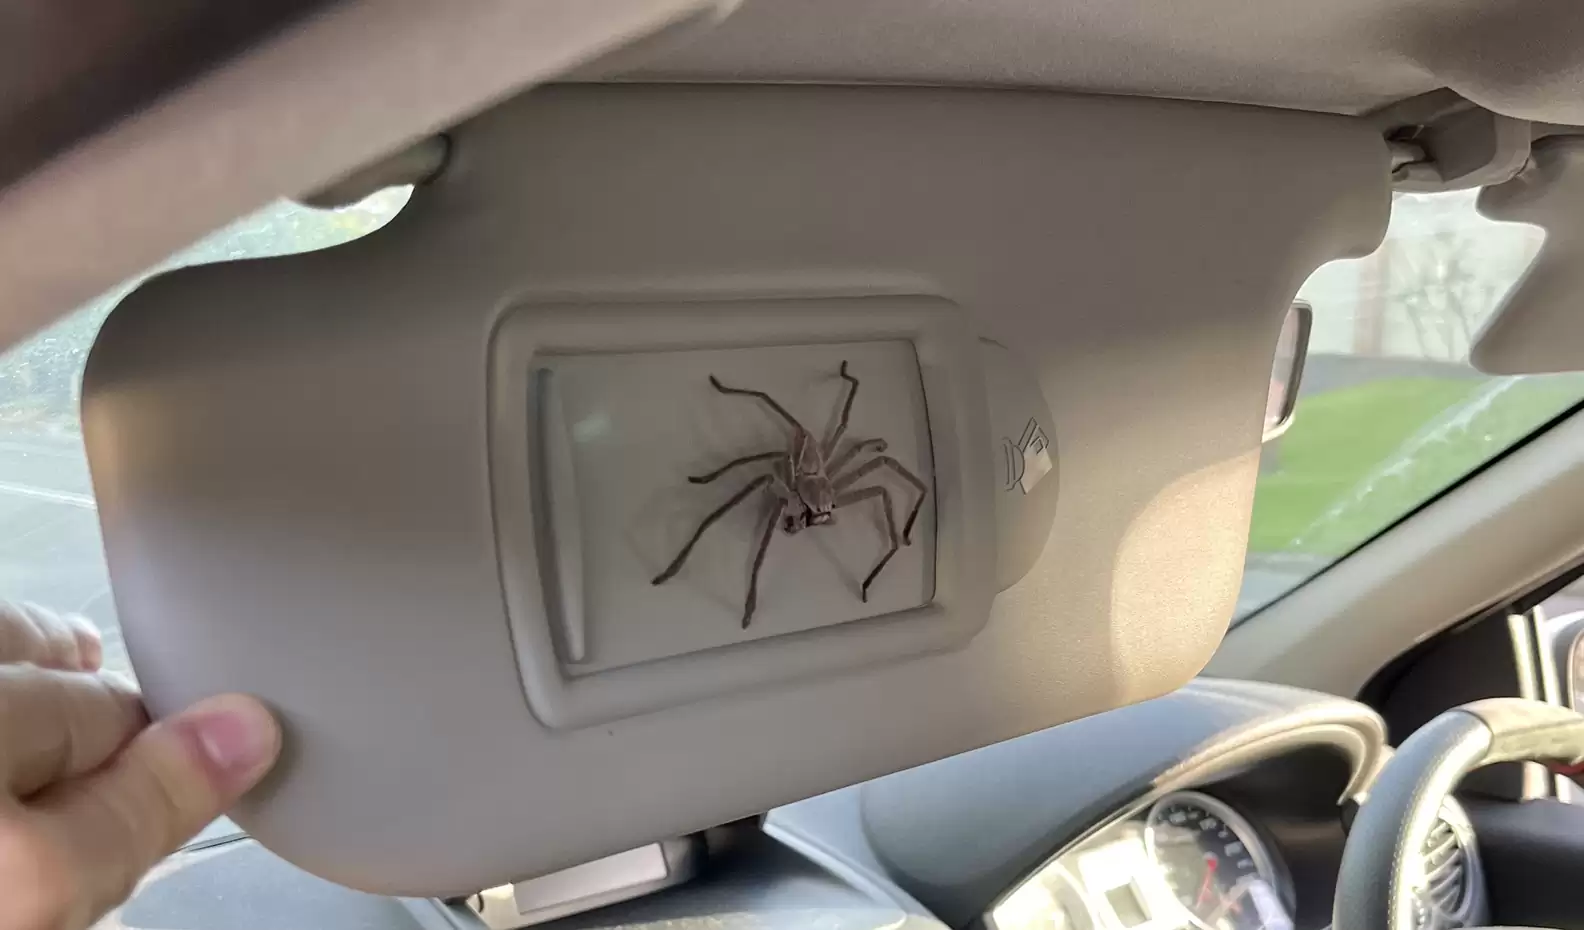 5 Ways to Get Rid of Spiders in Your Car